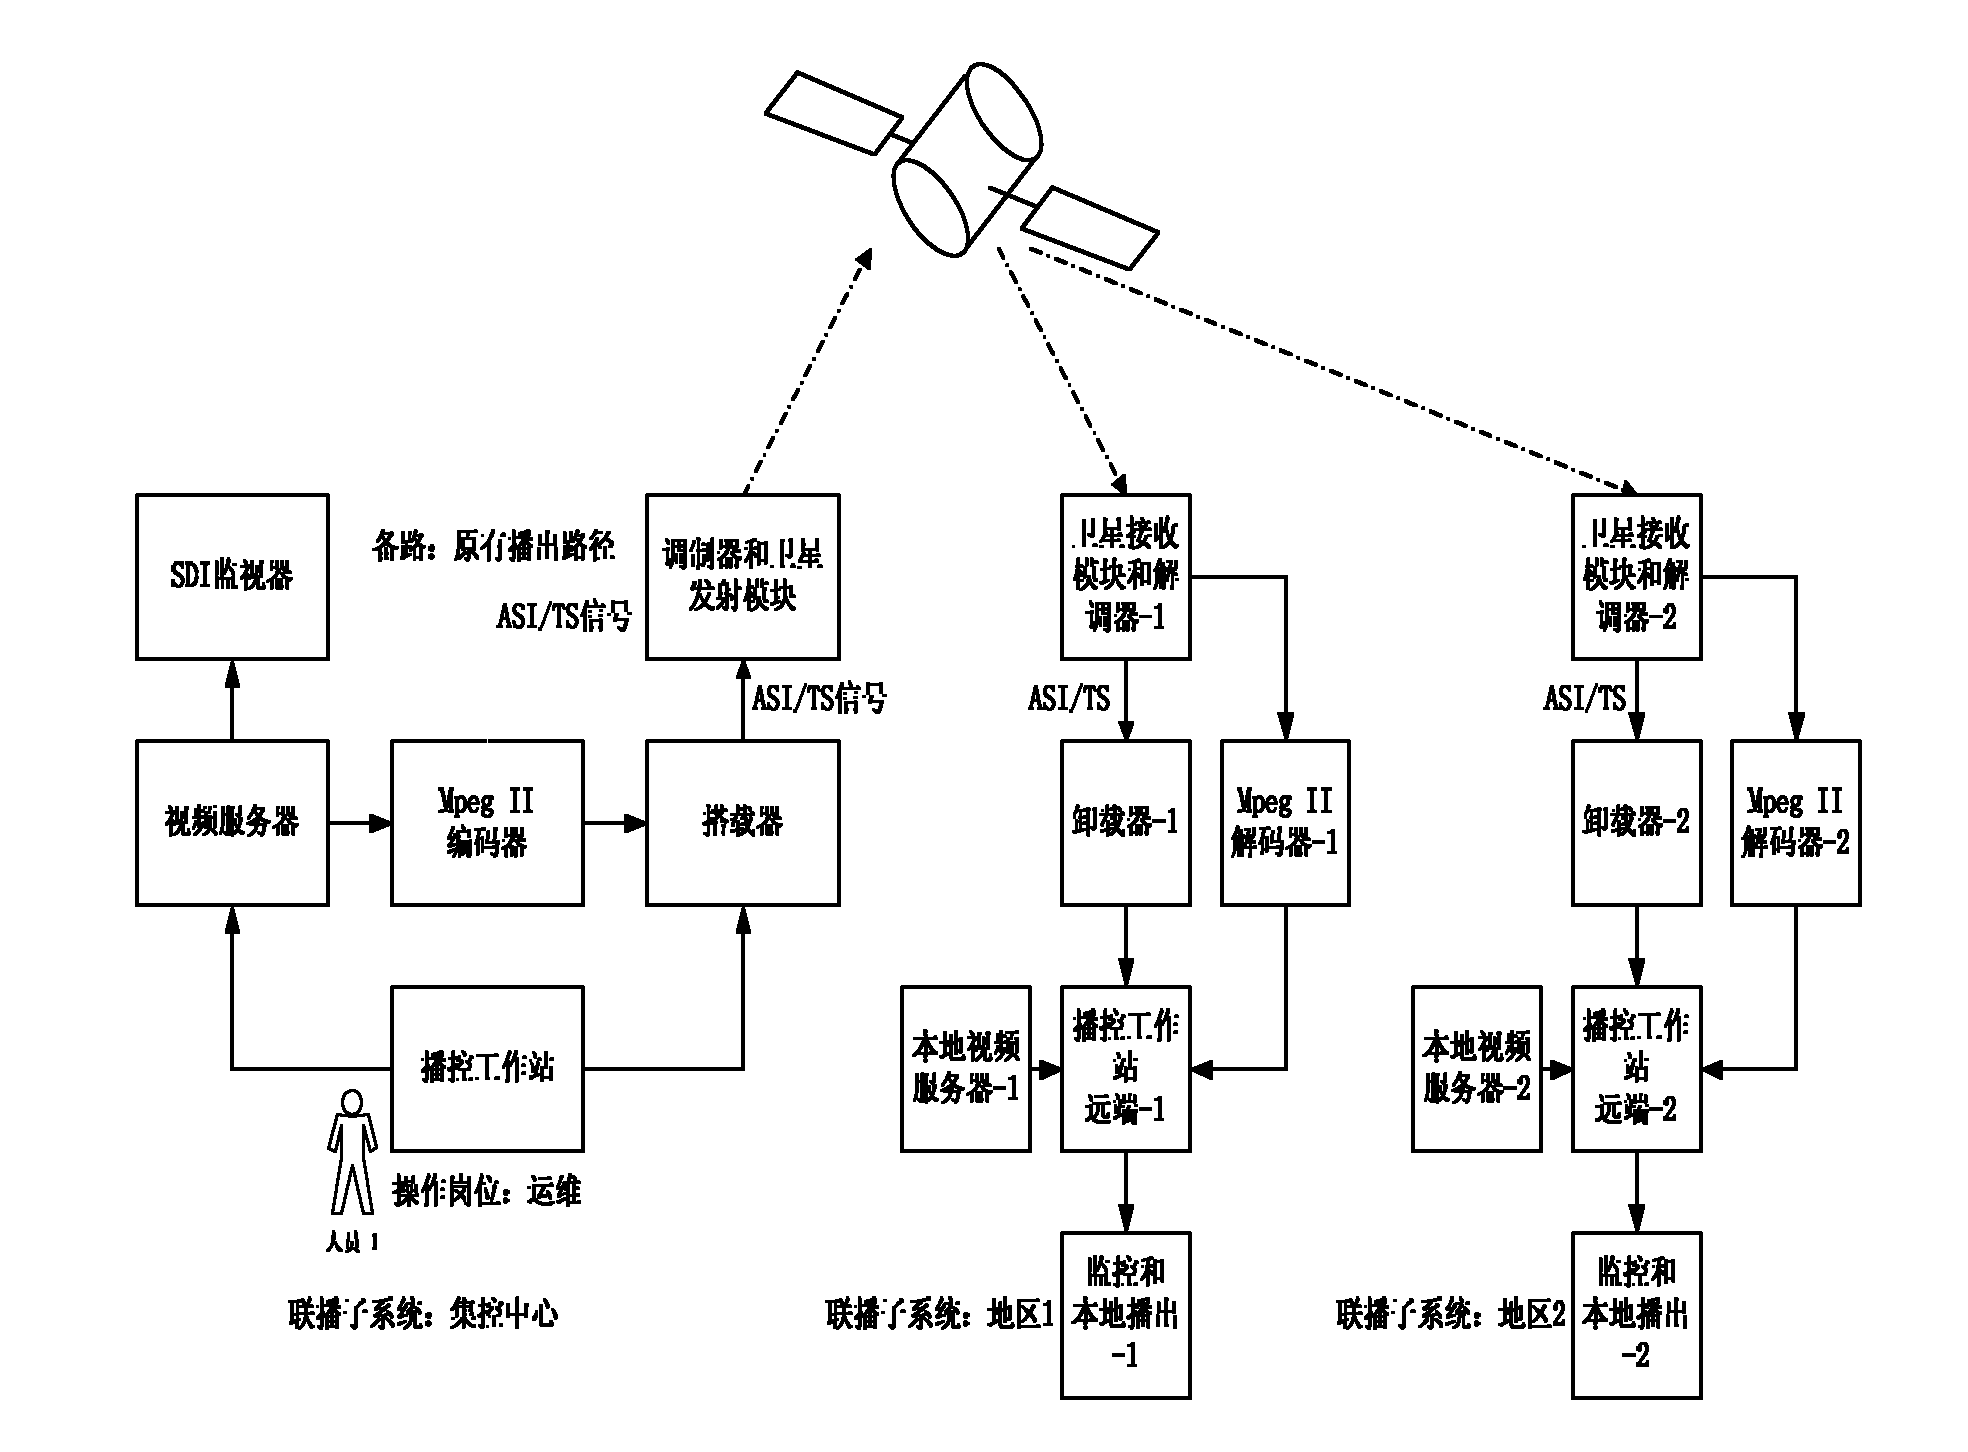 Method using information loaded by Mpeg II video stream to establish reliable transmission channel